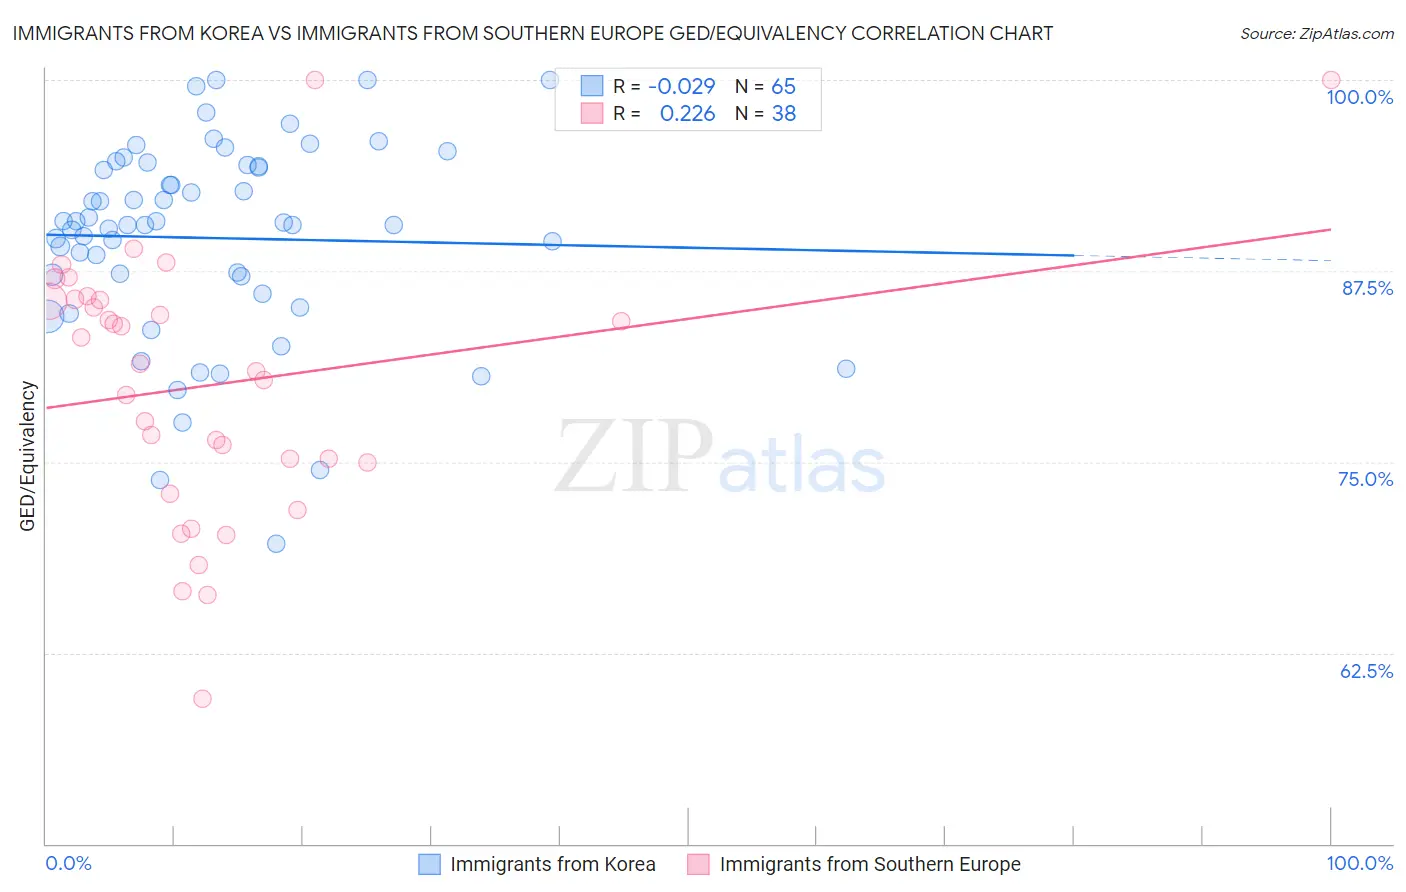 Immigrants from Korea vs Immigrants from Southern Europe GED/Equivalency